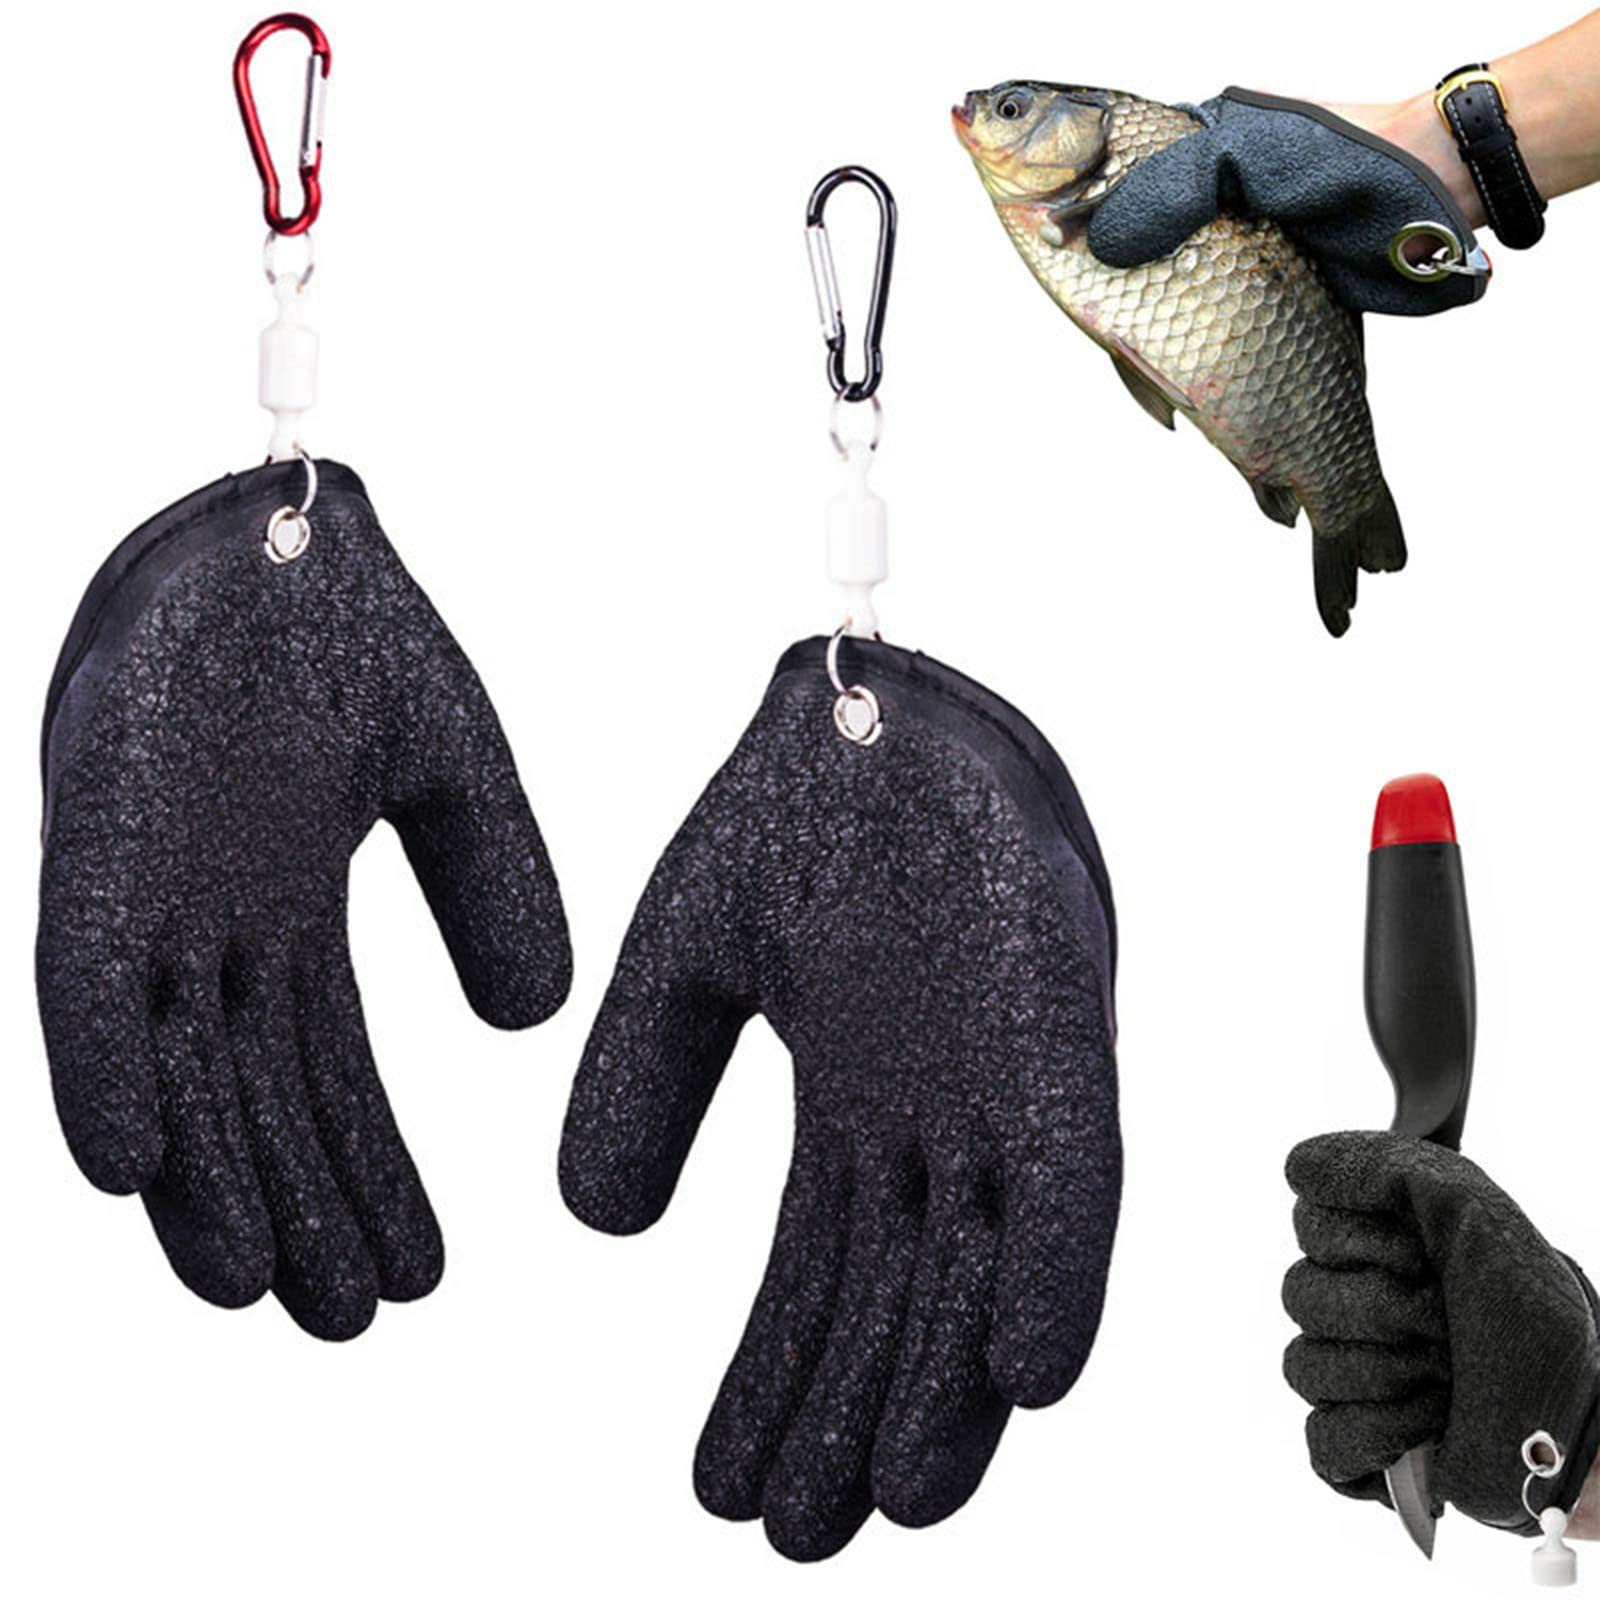 Release Fishing Gloves